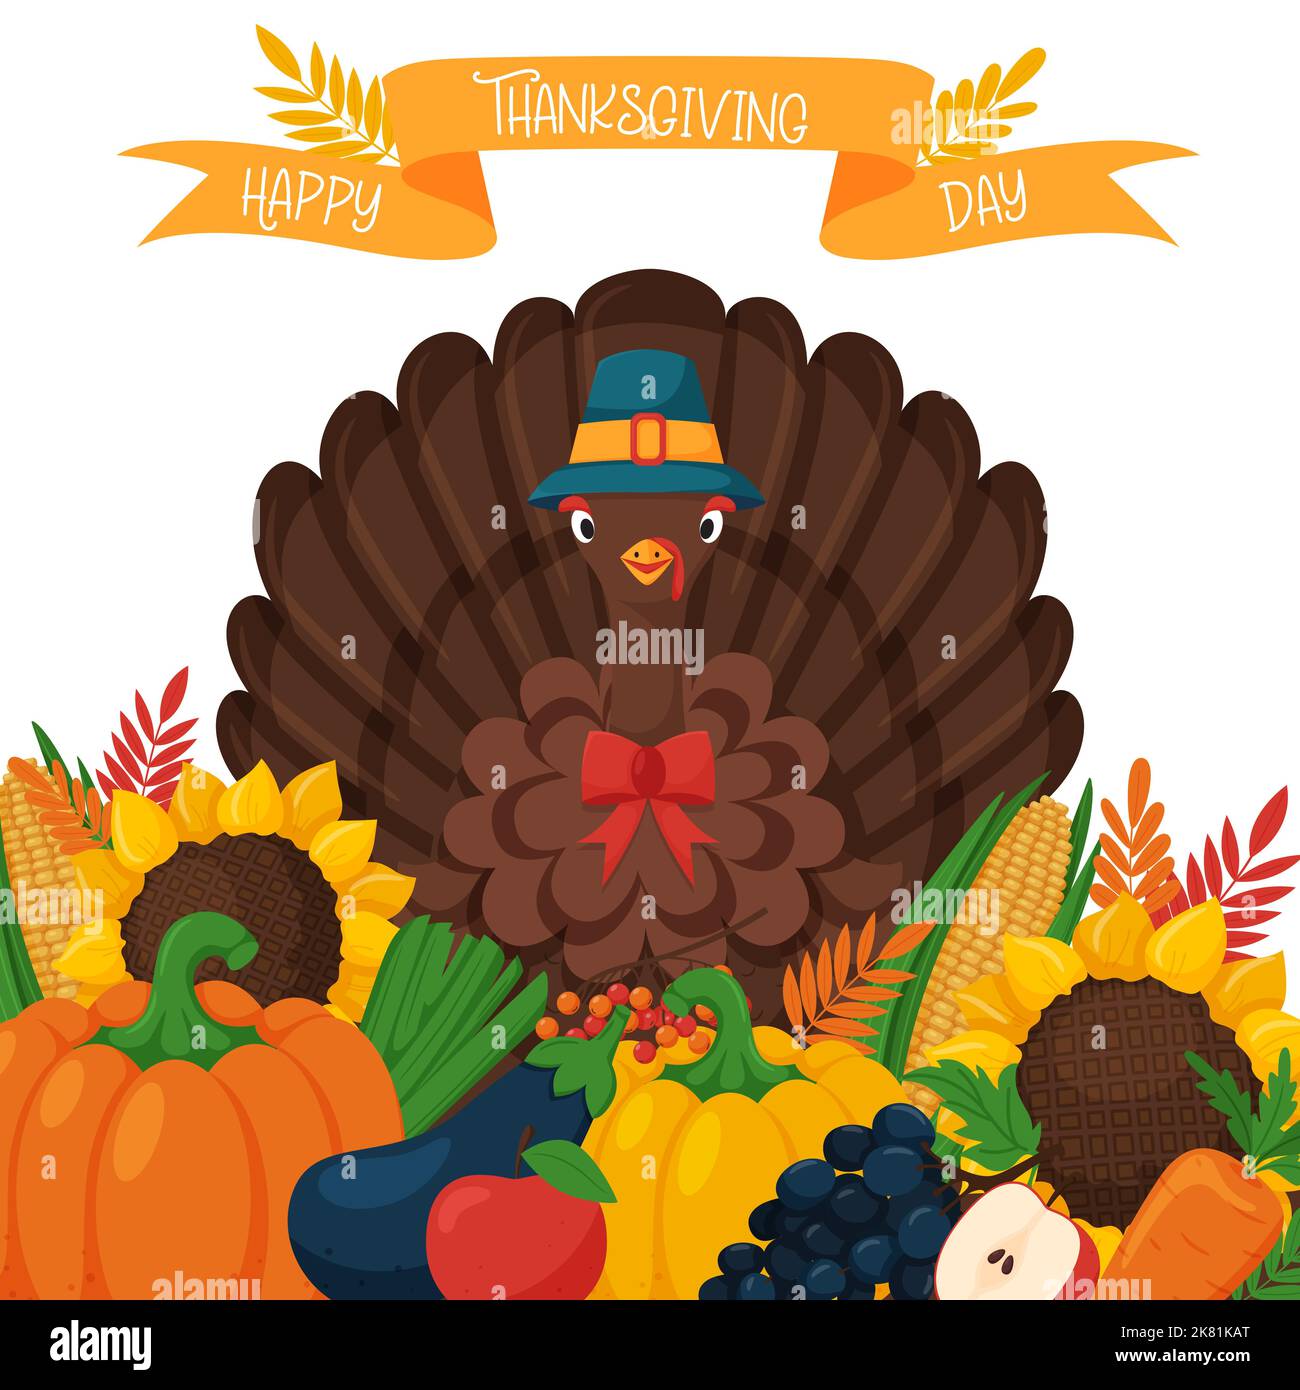 Cards with turkey in a hat surrounded by fruits and vegetables. Pumpkin, sunflower, corn, grape and rowan. Ribbon with words Happy Thanksgiving day. F Stock Vector